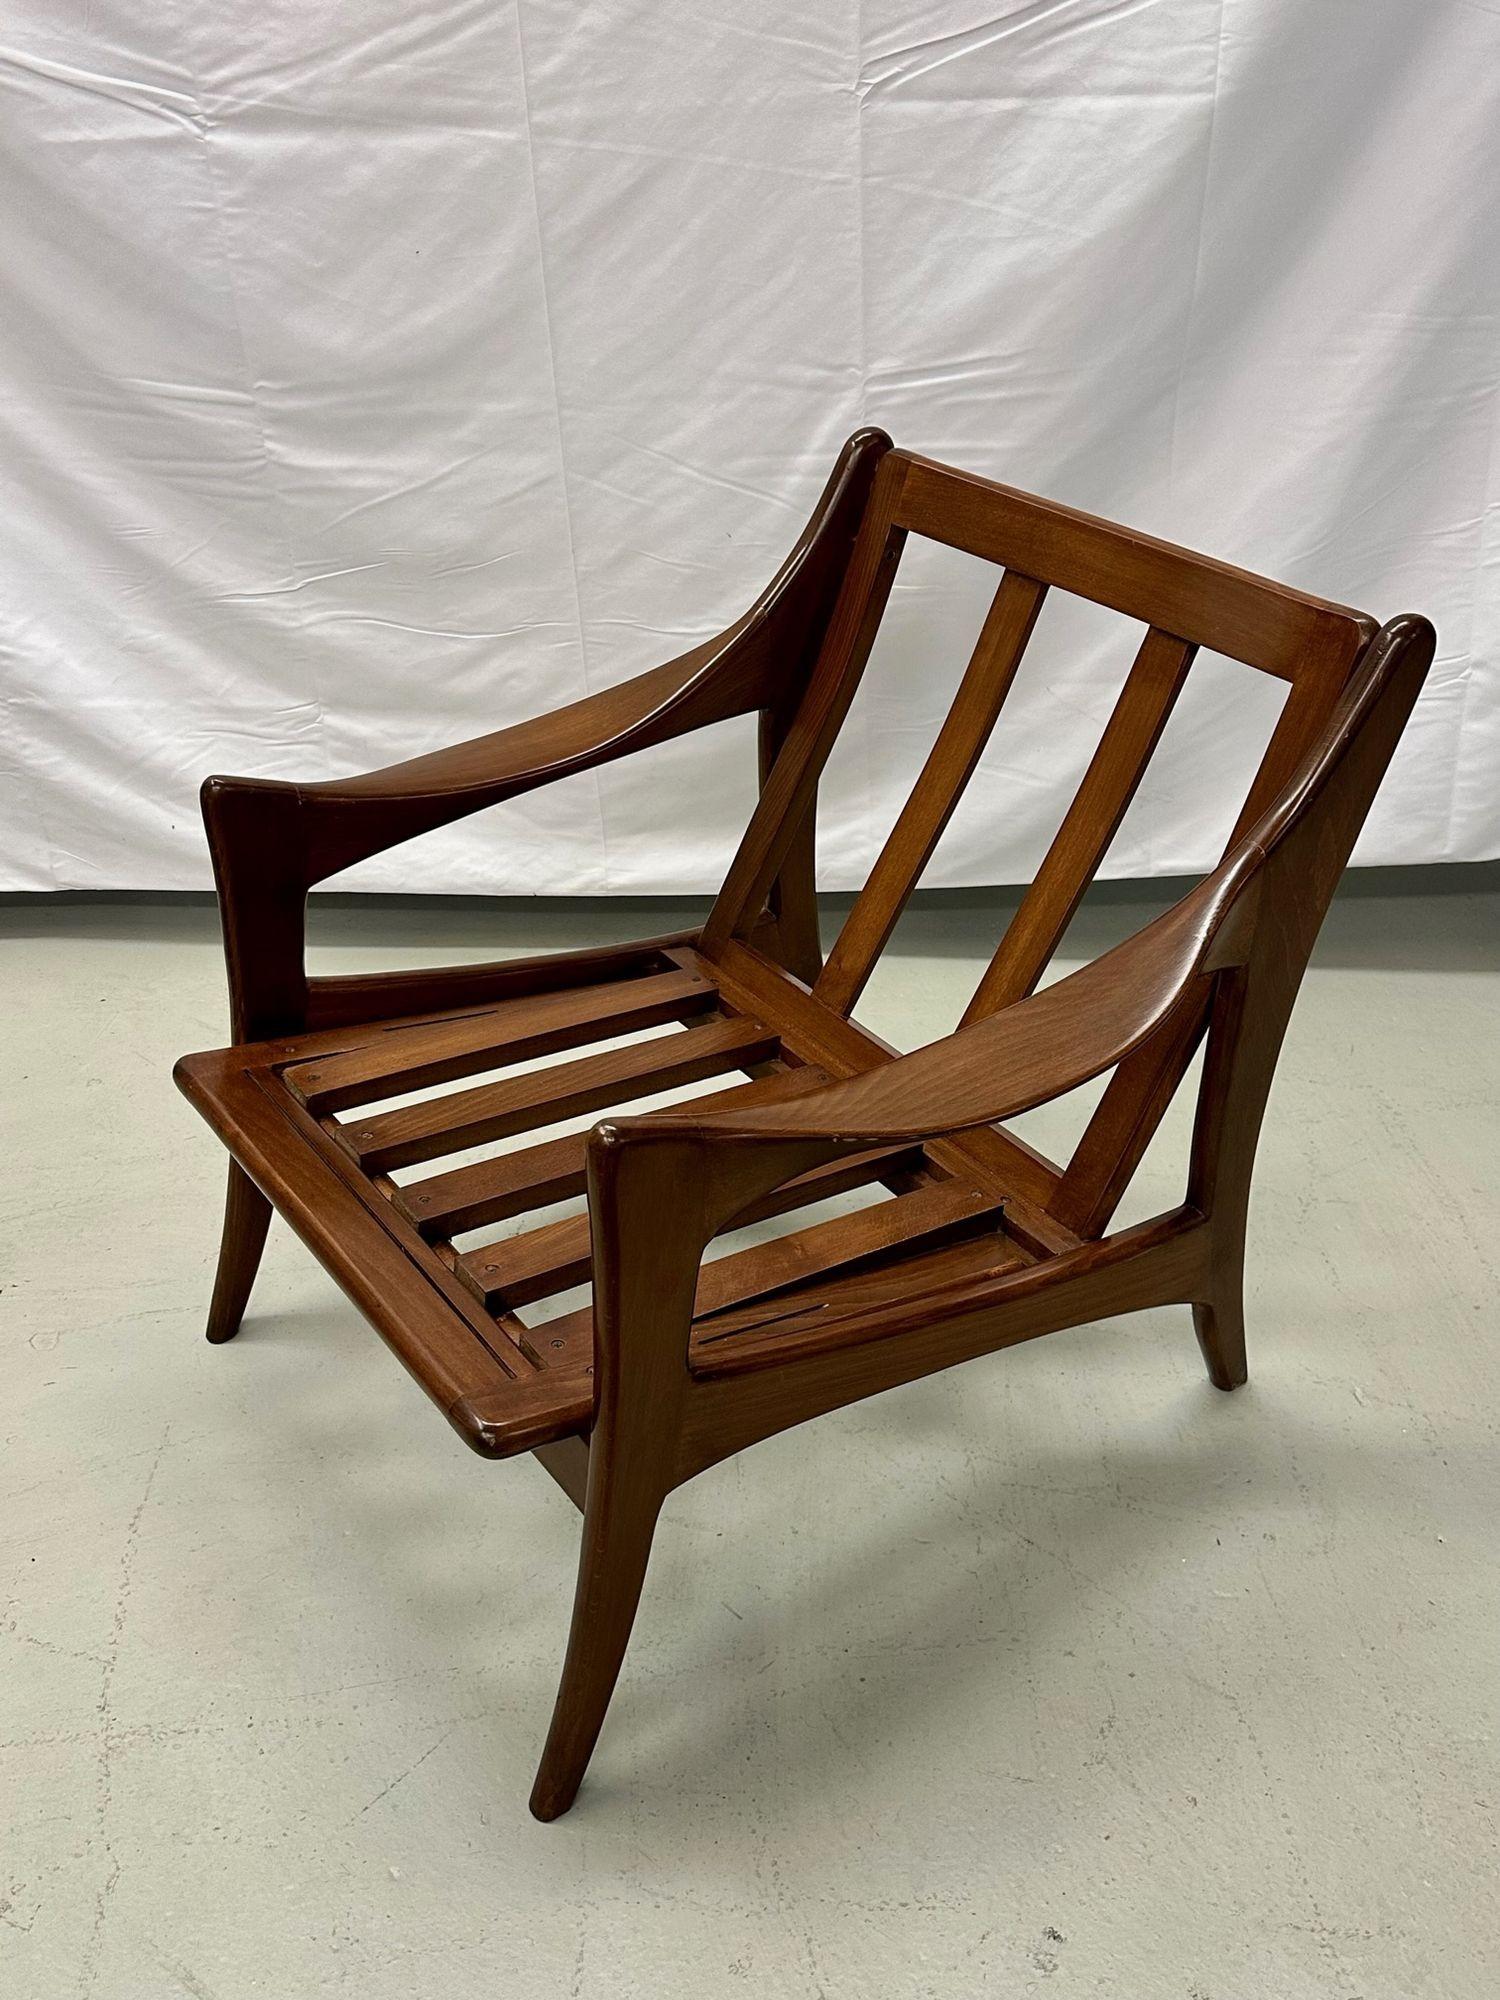 Pair of Dutch Mid-Century Modern Style Arm / Lounge Chairs, Teak, Brass In Good Condition For Sale In Stamford, CT